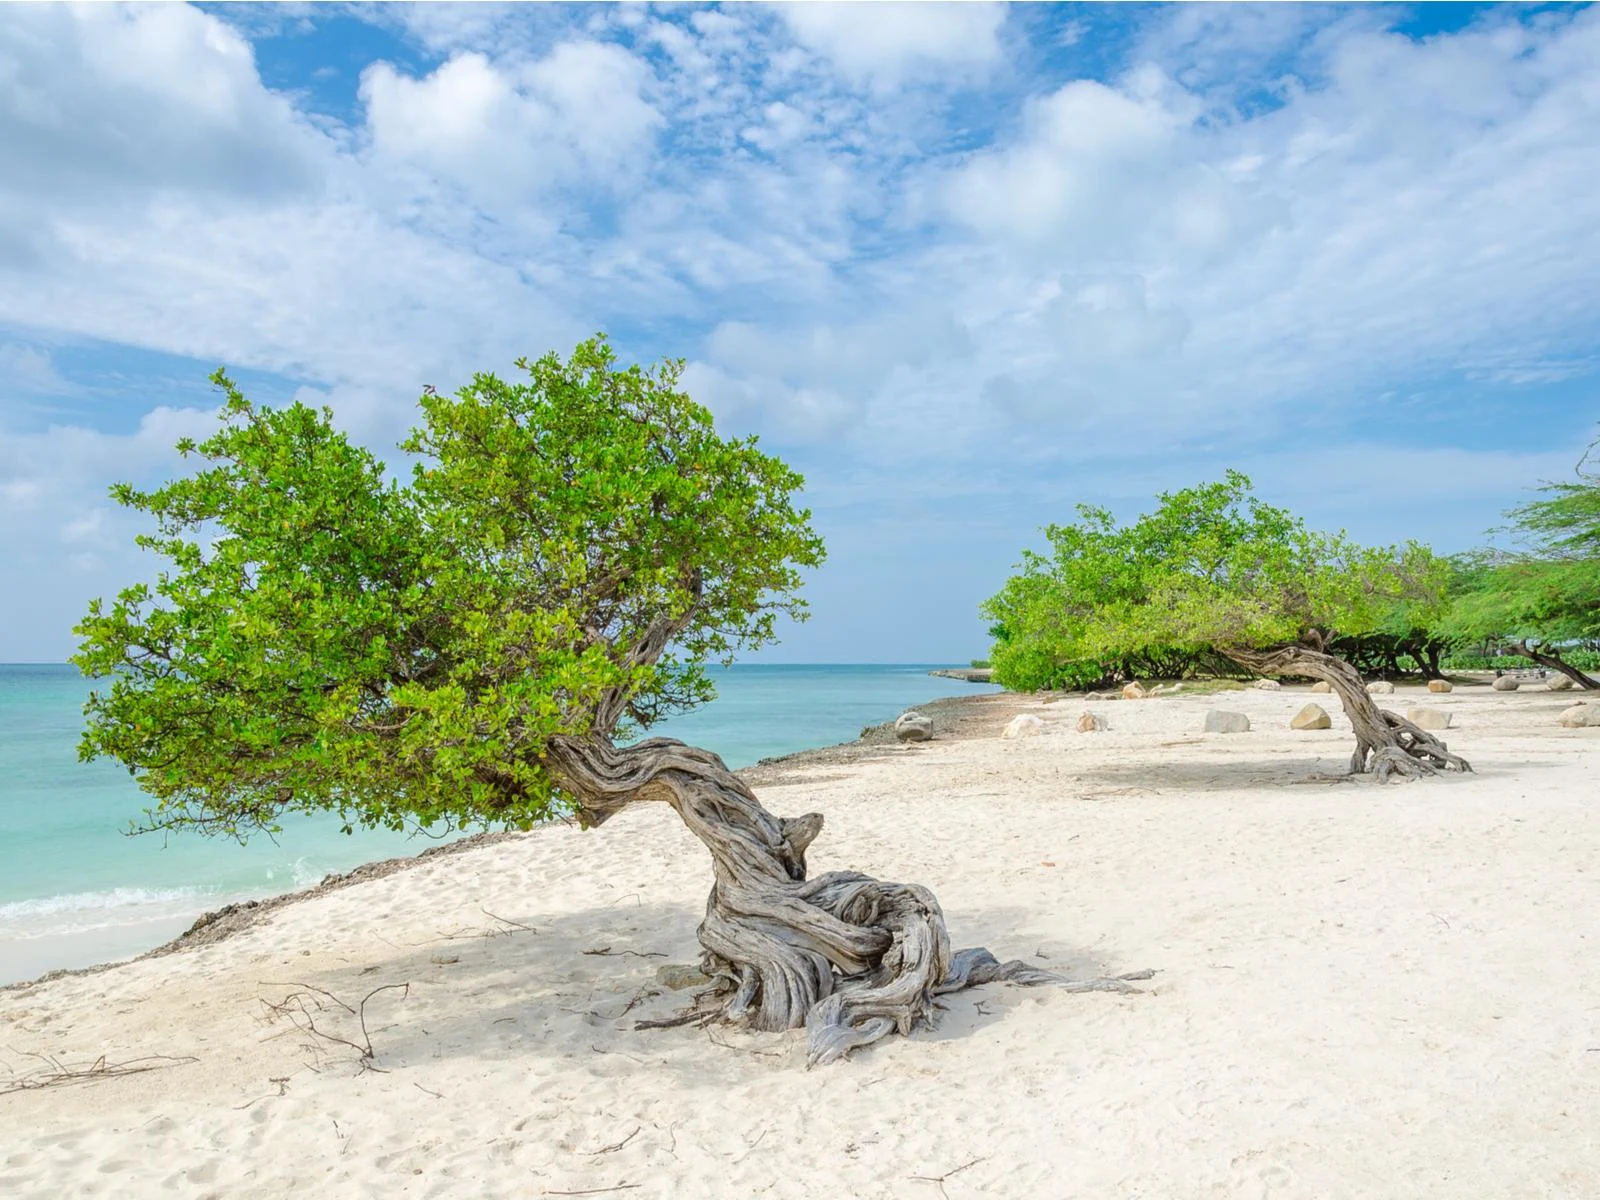 Divi Divi trees pointing towards the sea, rooted on the soft white sand of Eagle Beach, one of the best beaches in Aruba with clear blue waters